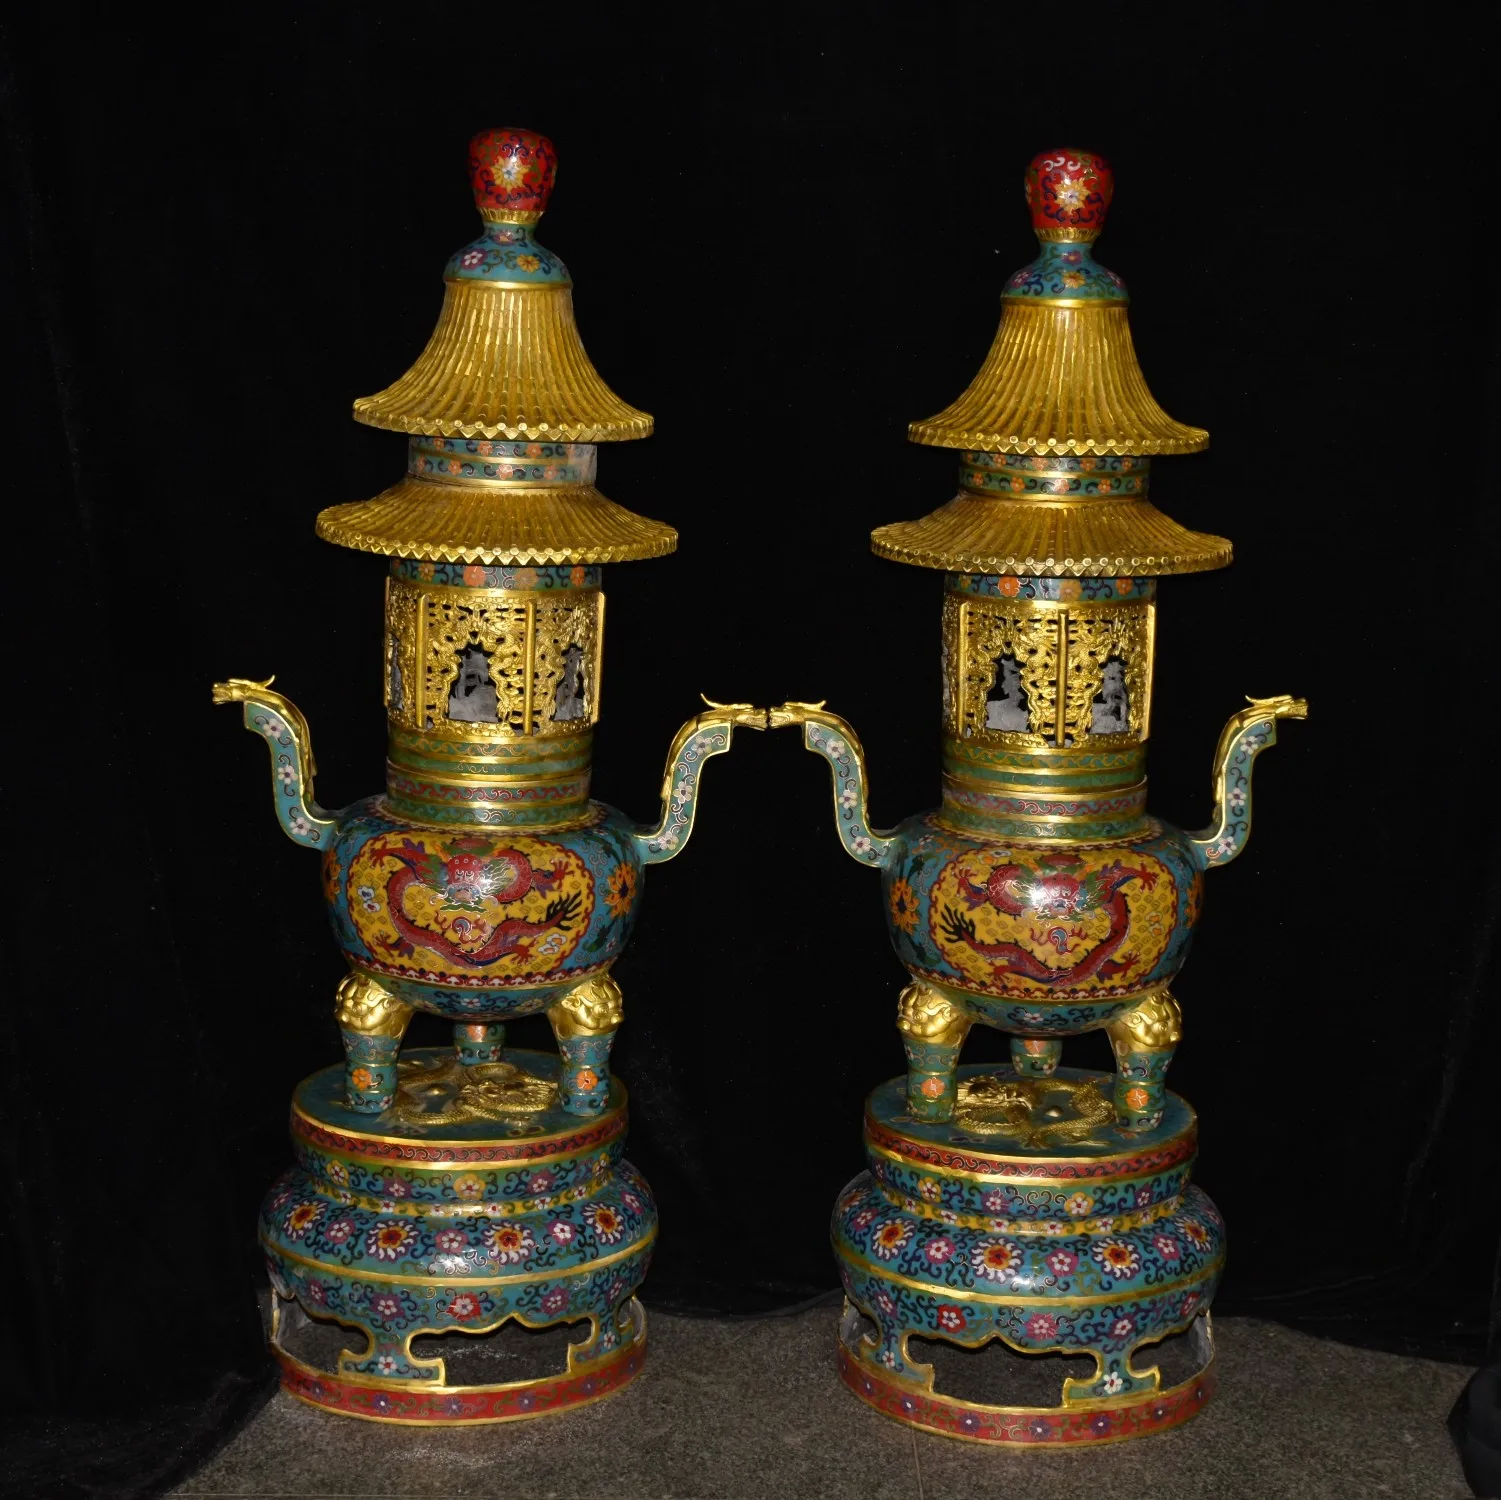 

39"Tibet Temple Collection Old Bronze Cloisonne Enamel Three story pagoda stupa incense burner A pair Ornaments Town house